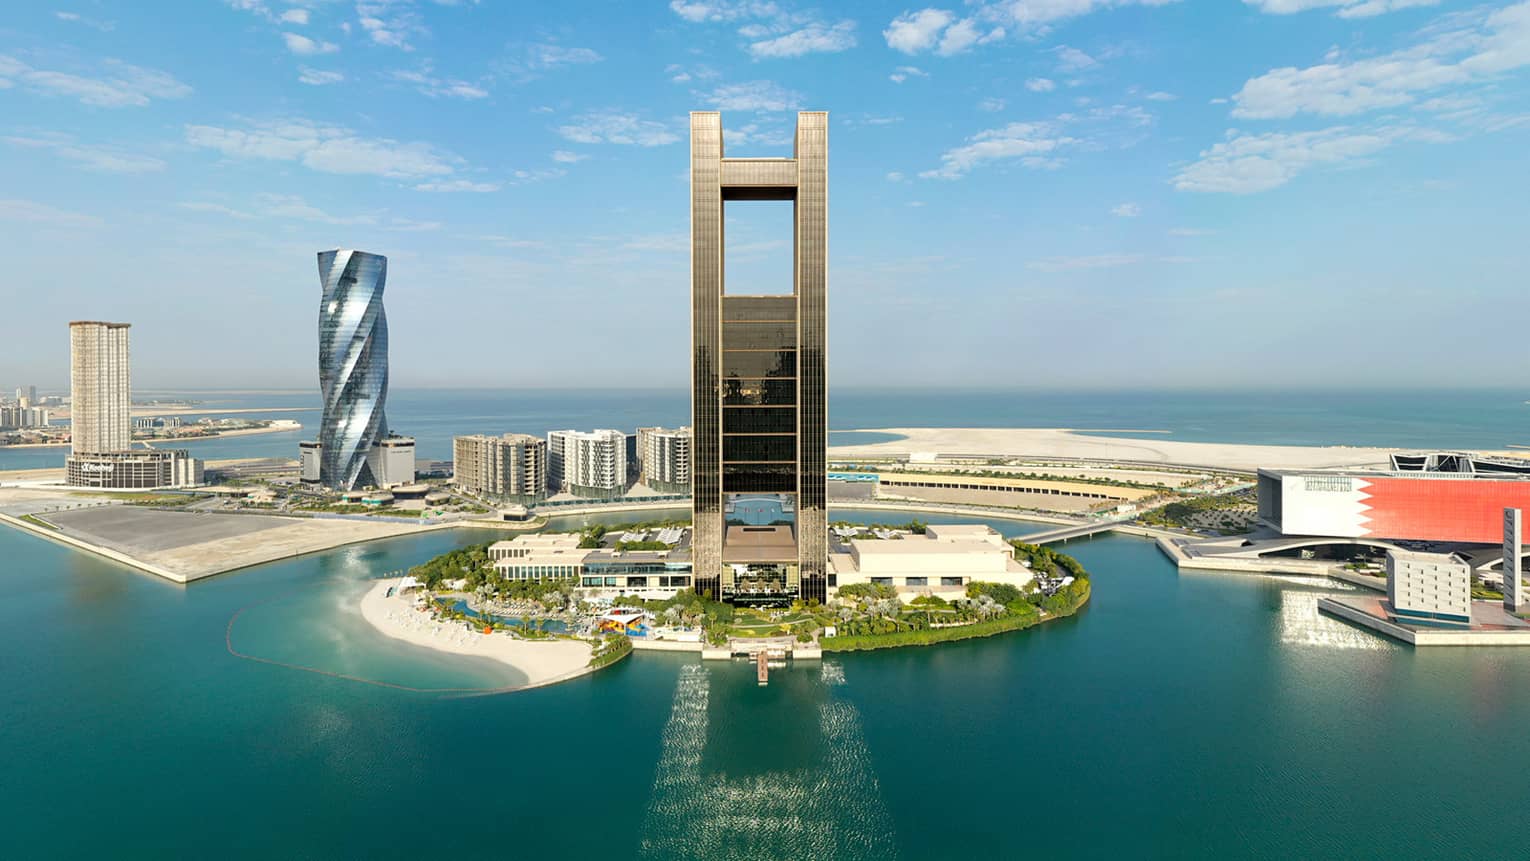 A drone shot of the Four Seasons Bahrain Property showcasing the sea and the large frame of the hotel's facade.